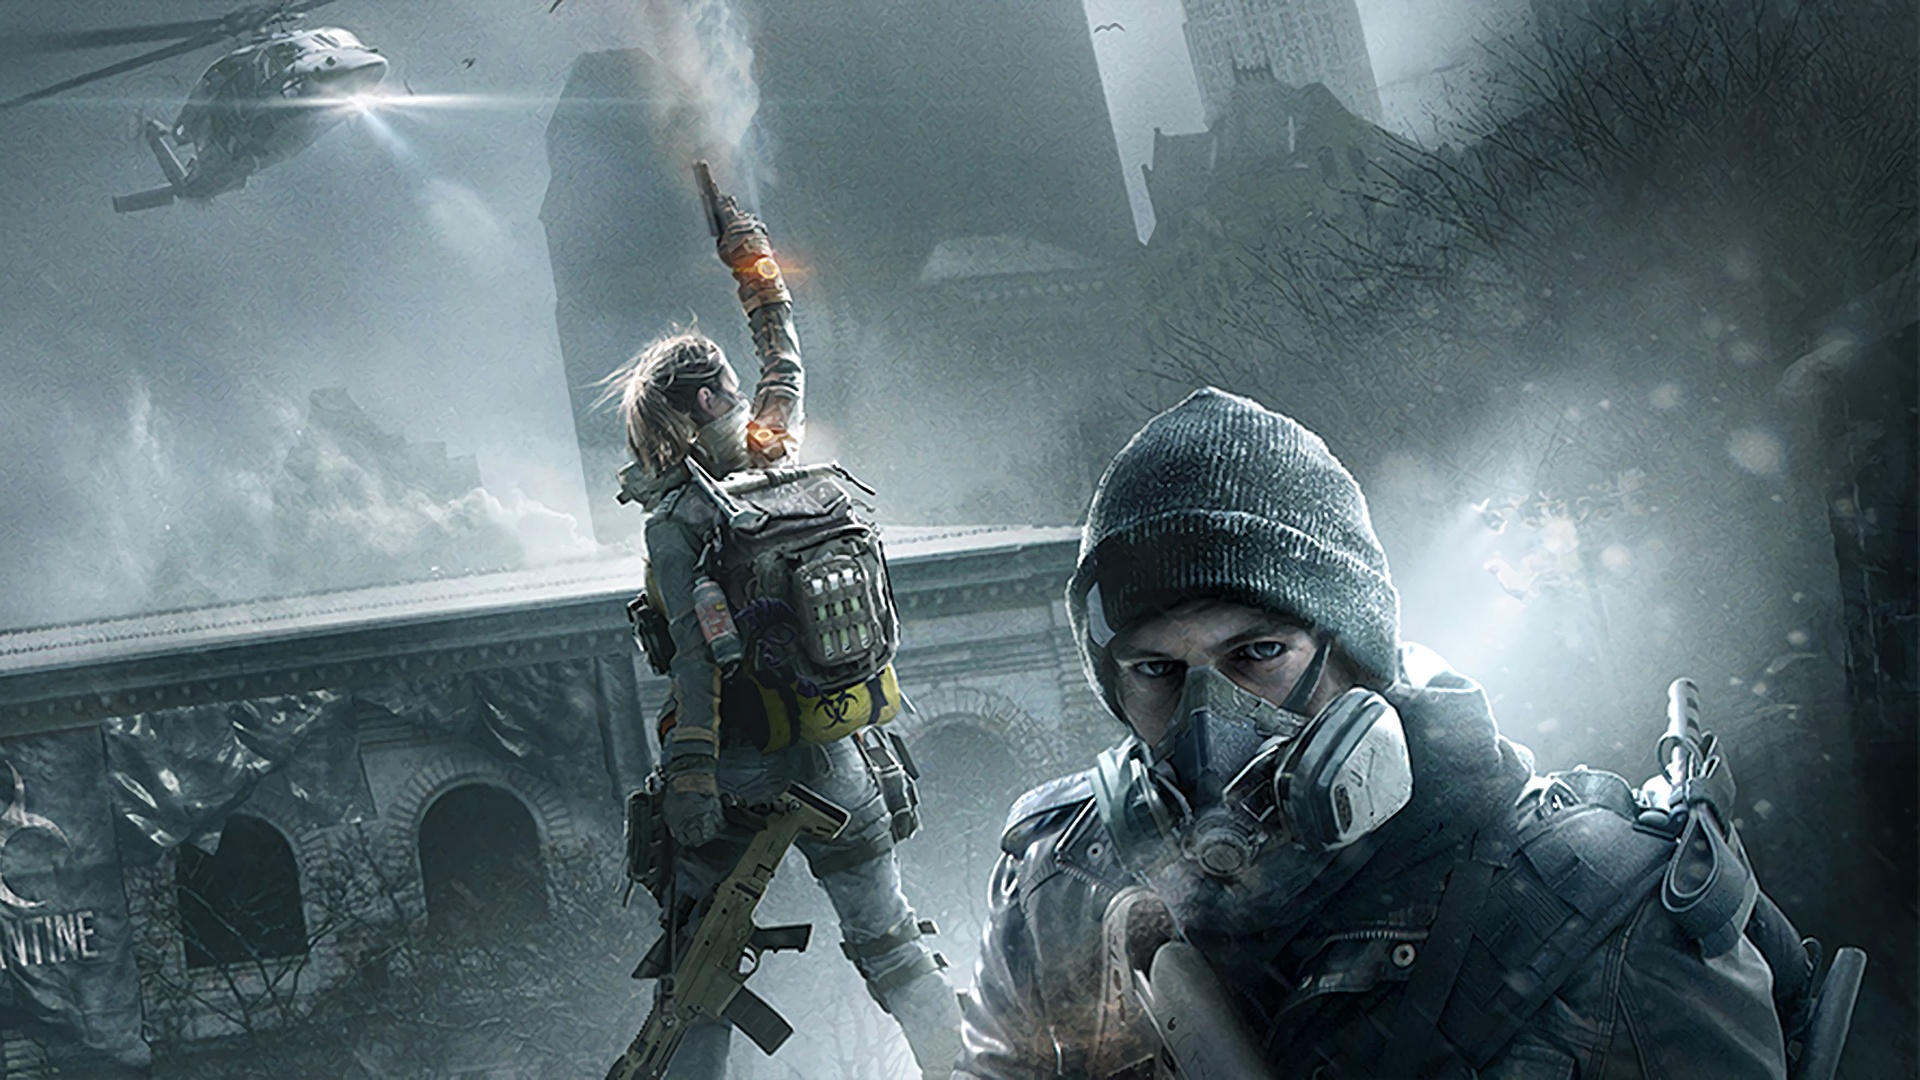 tom clancy the division